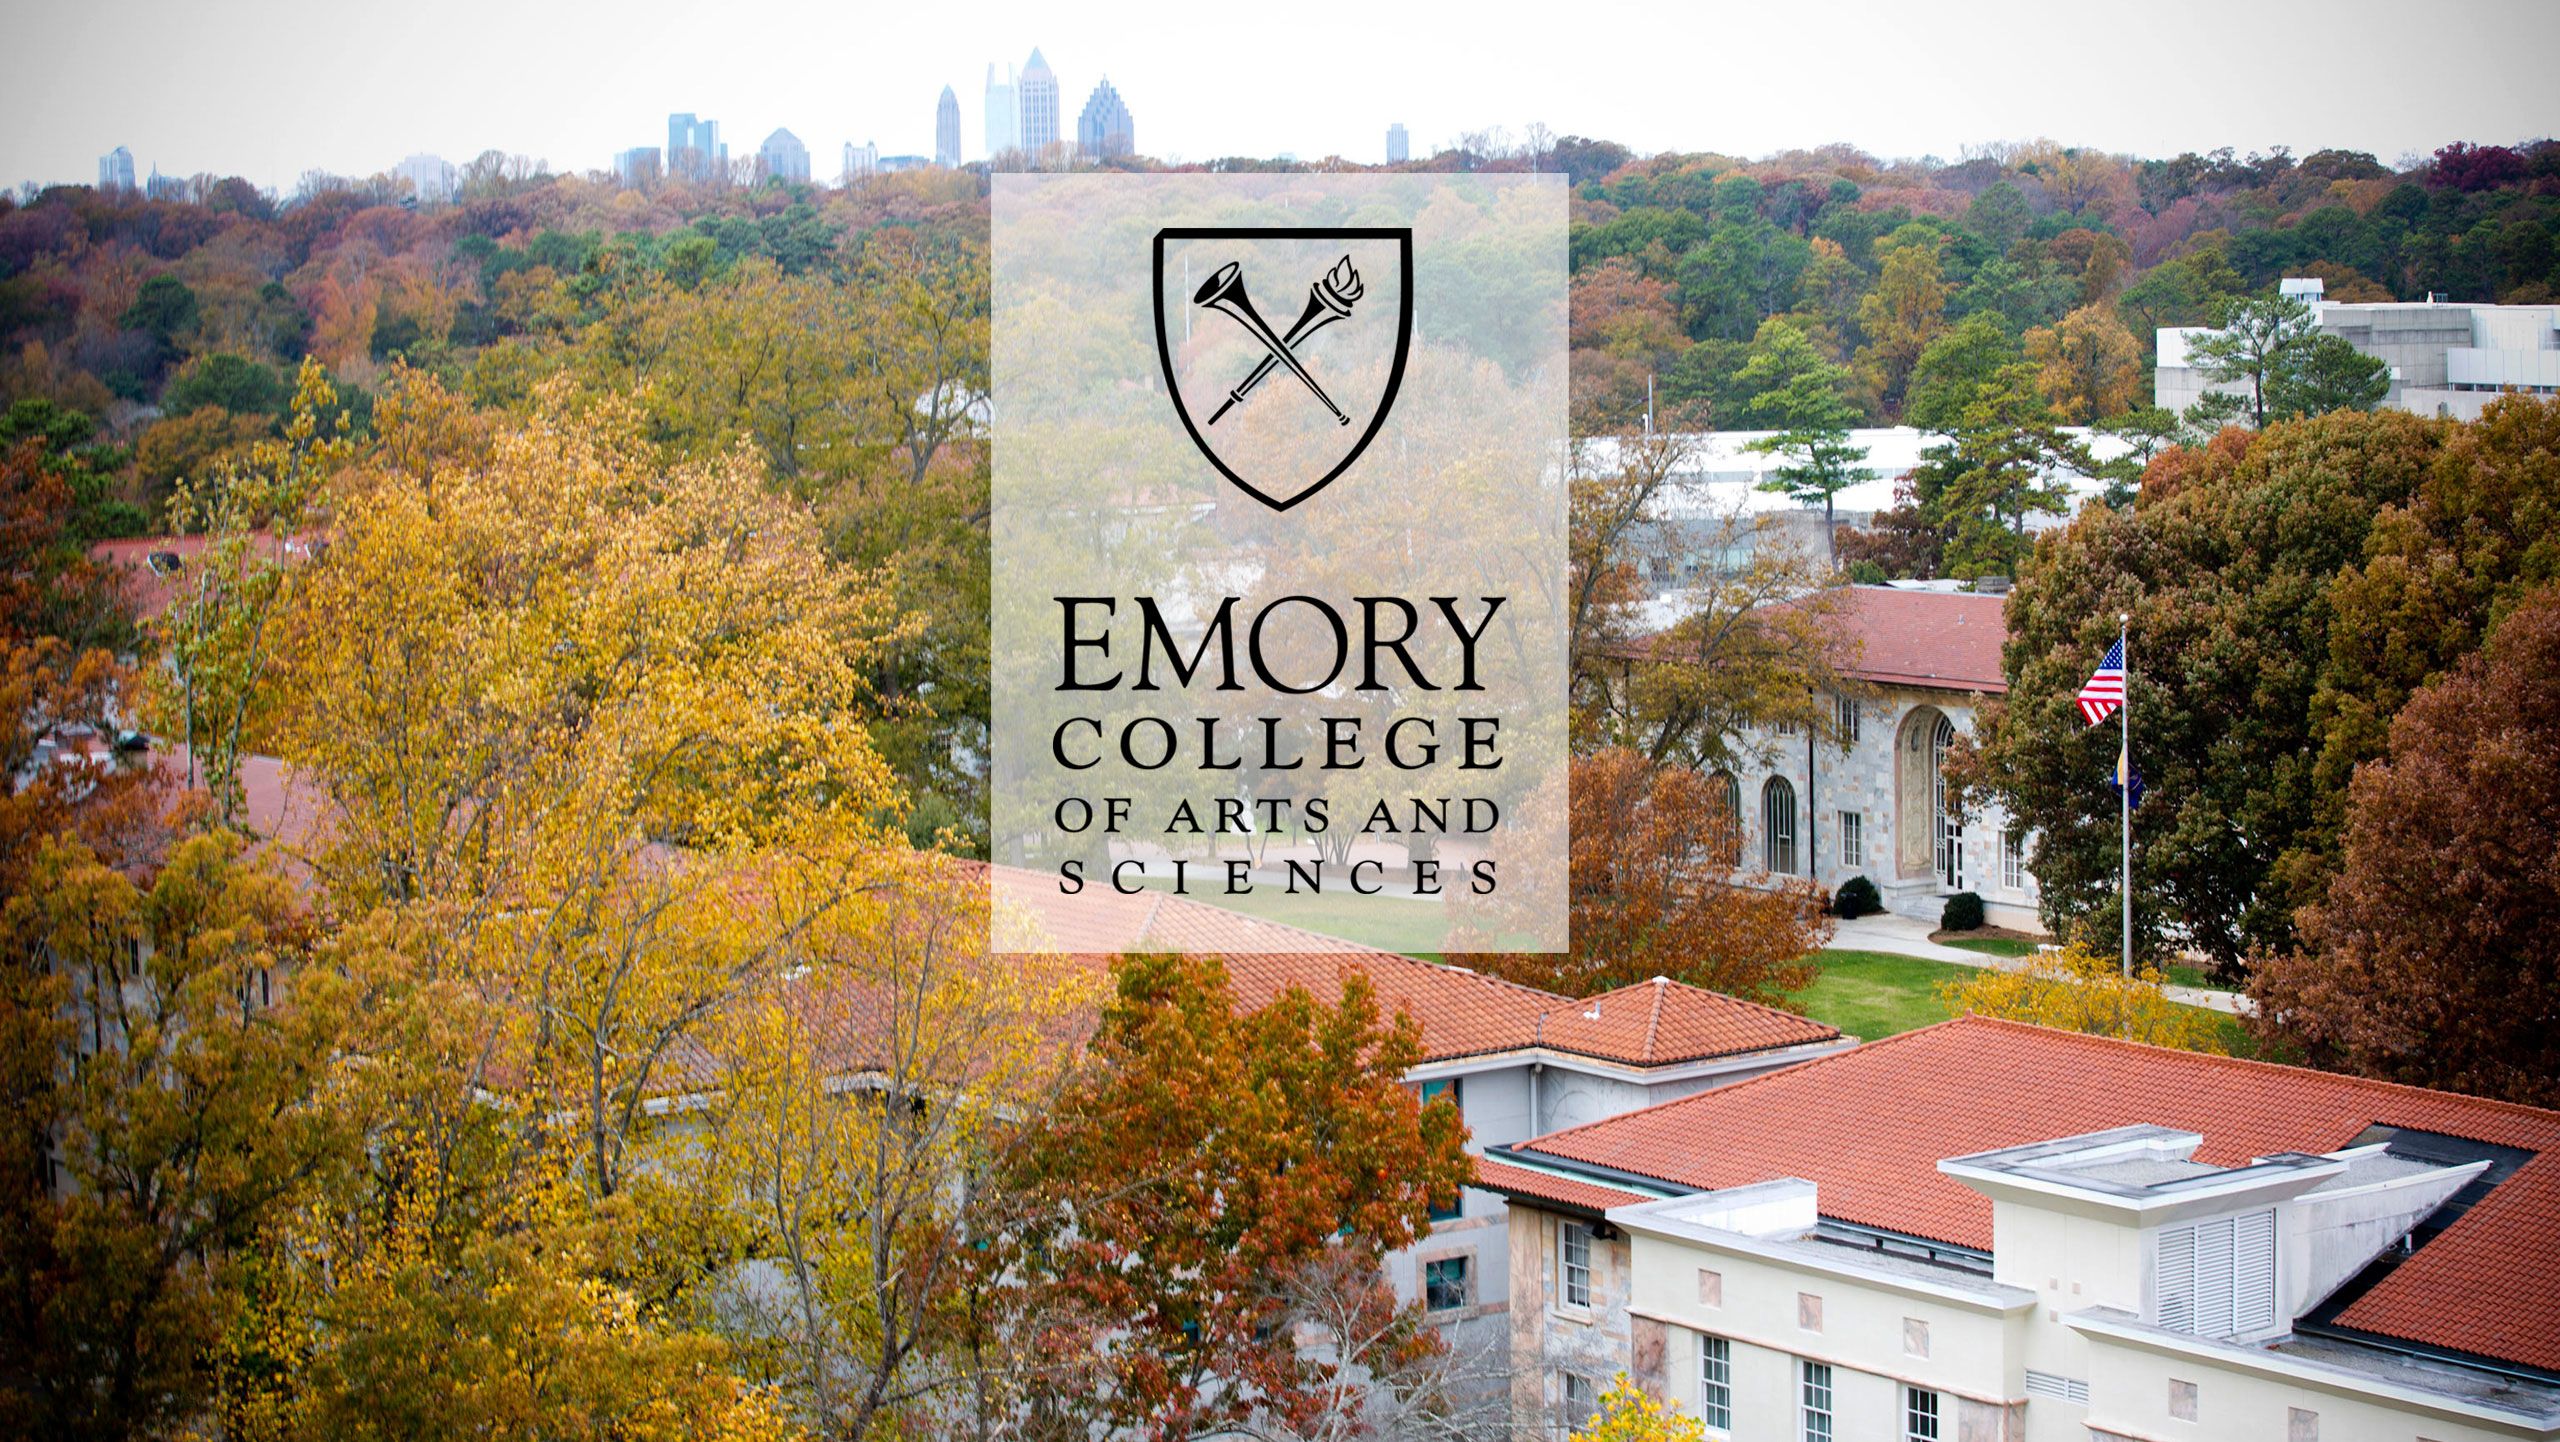 overhead view of the buildings on the quad in fall with Atlanta skyline in background and Emory College logo overlaid on photo.